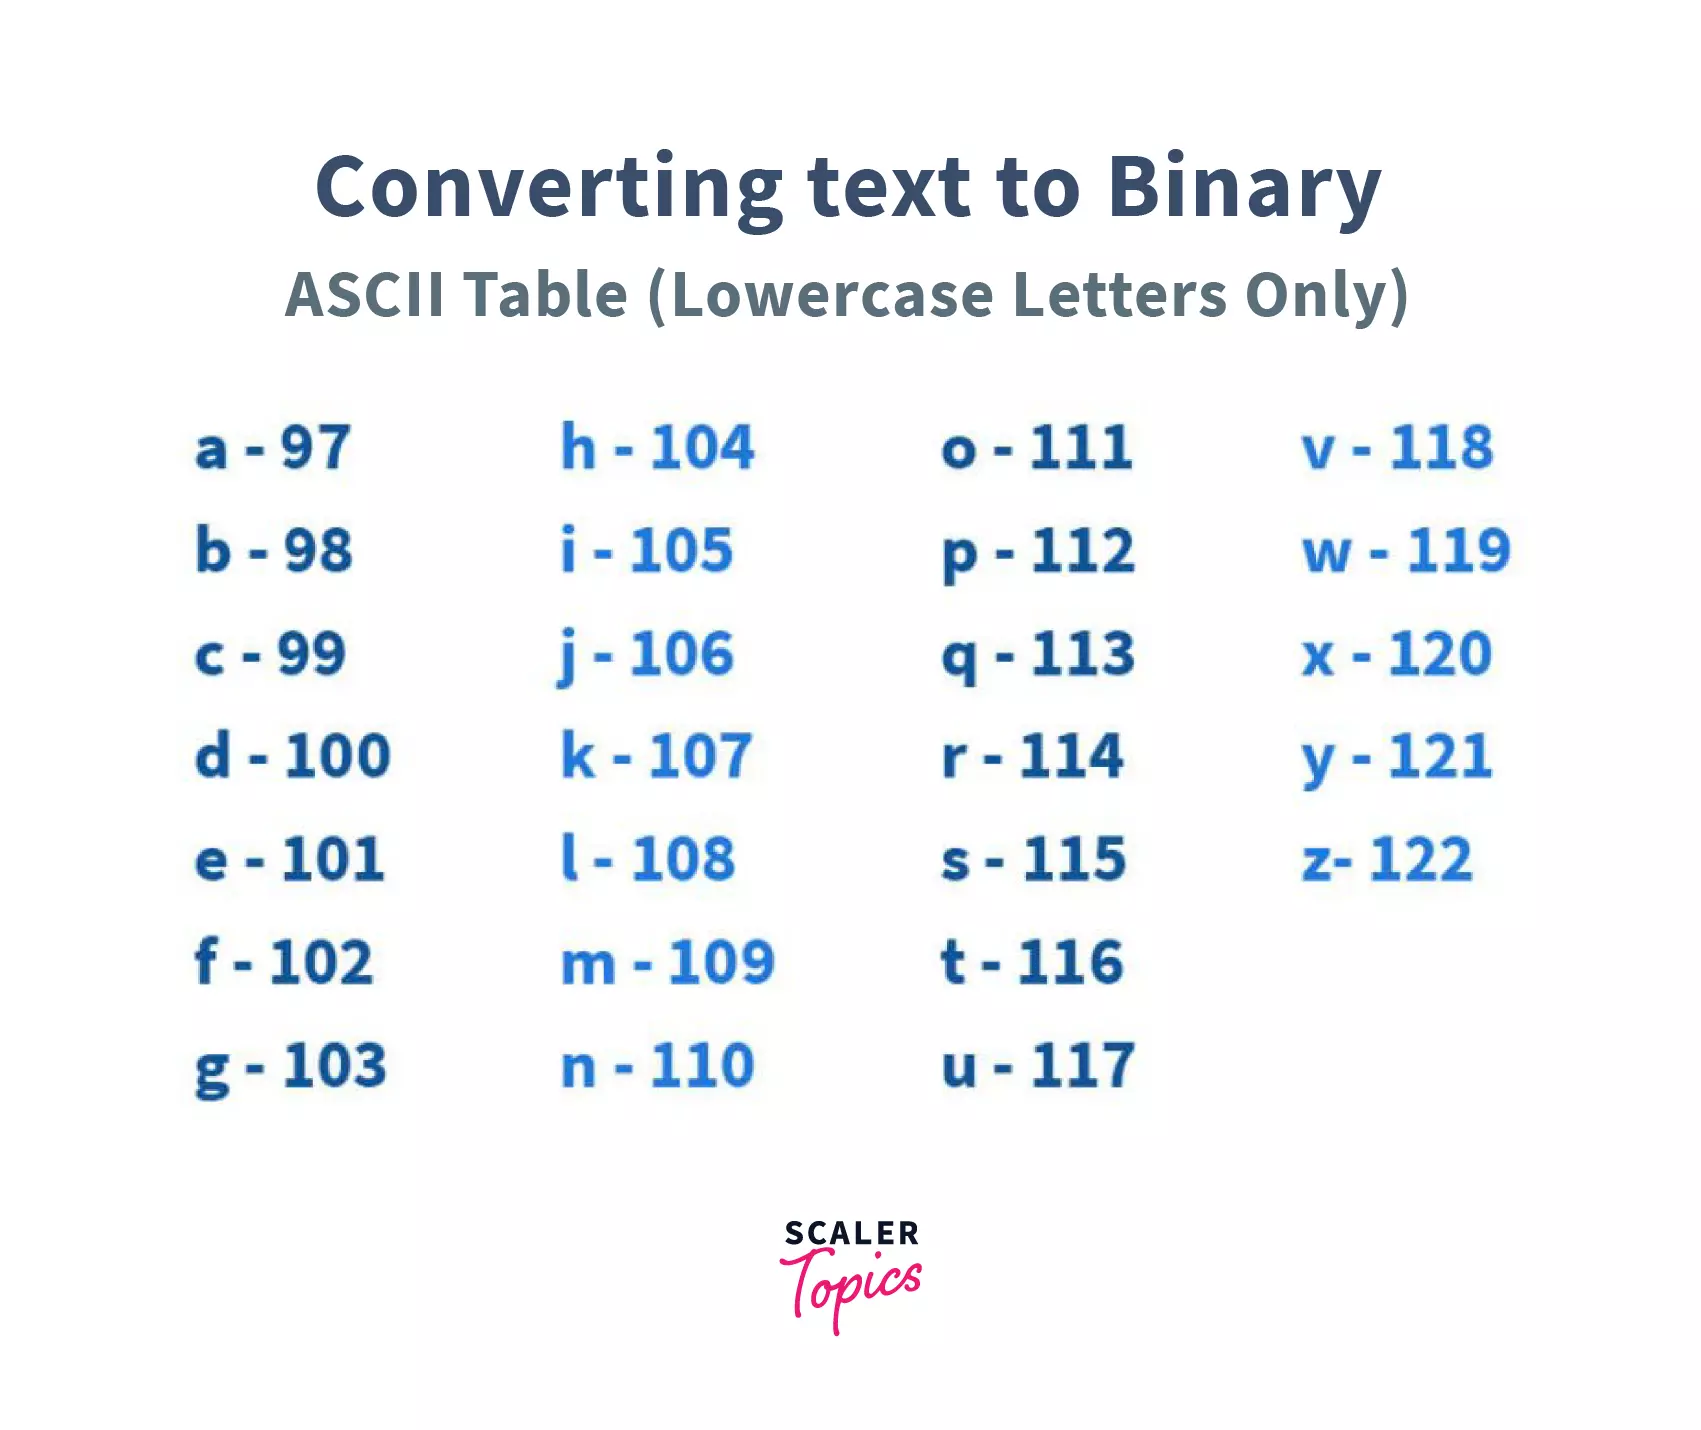 Converting text to binary - Compare two strings in C++